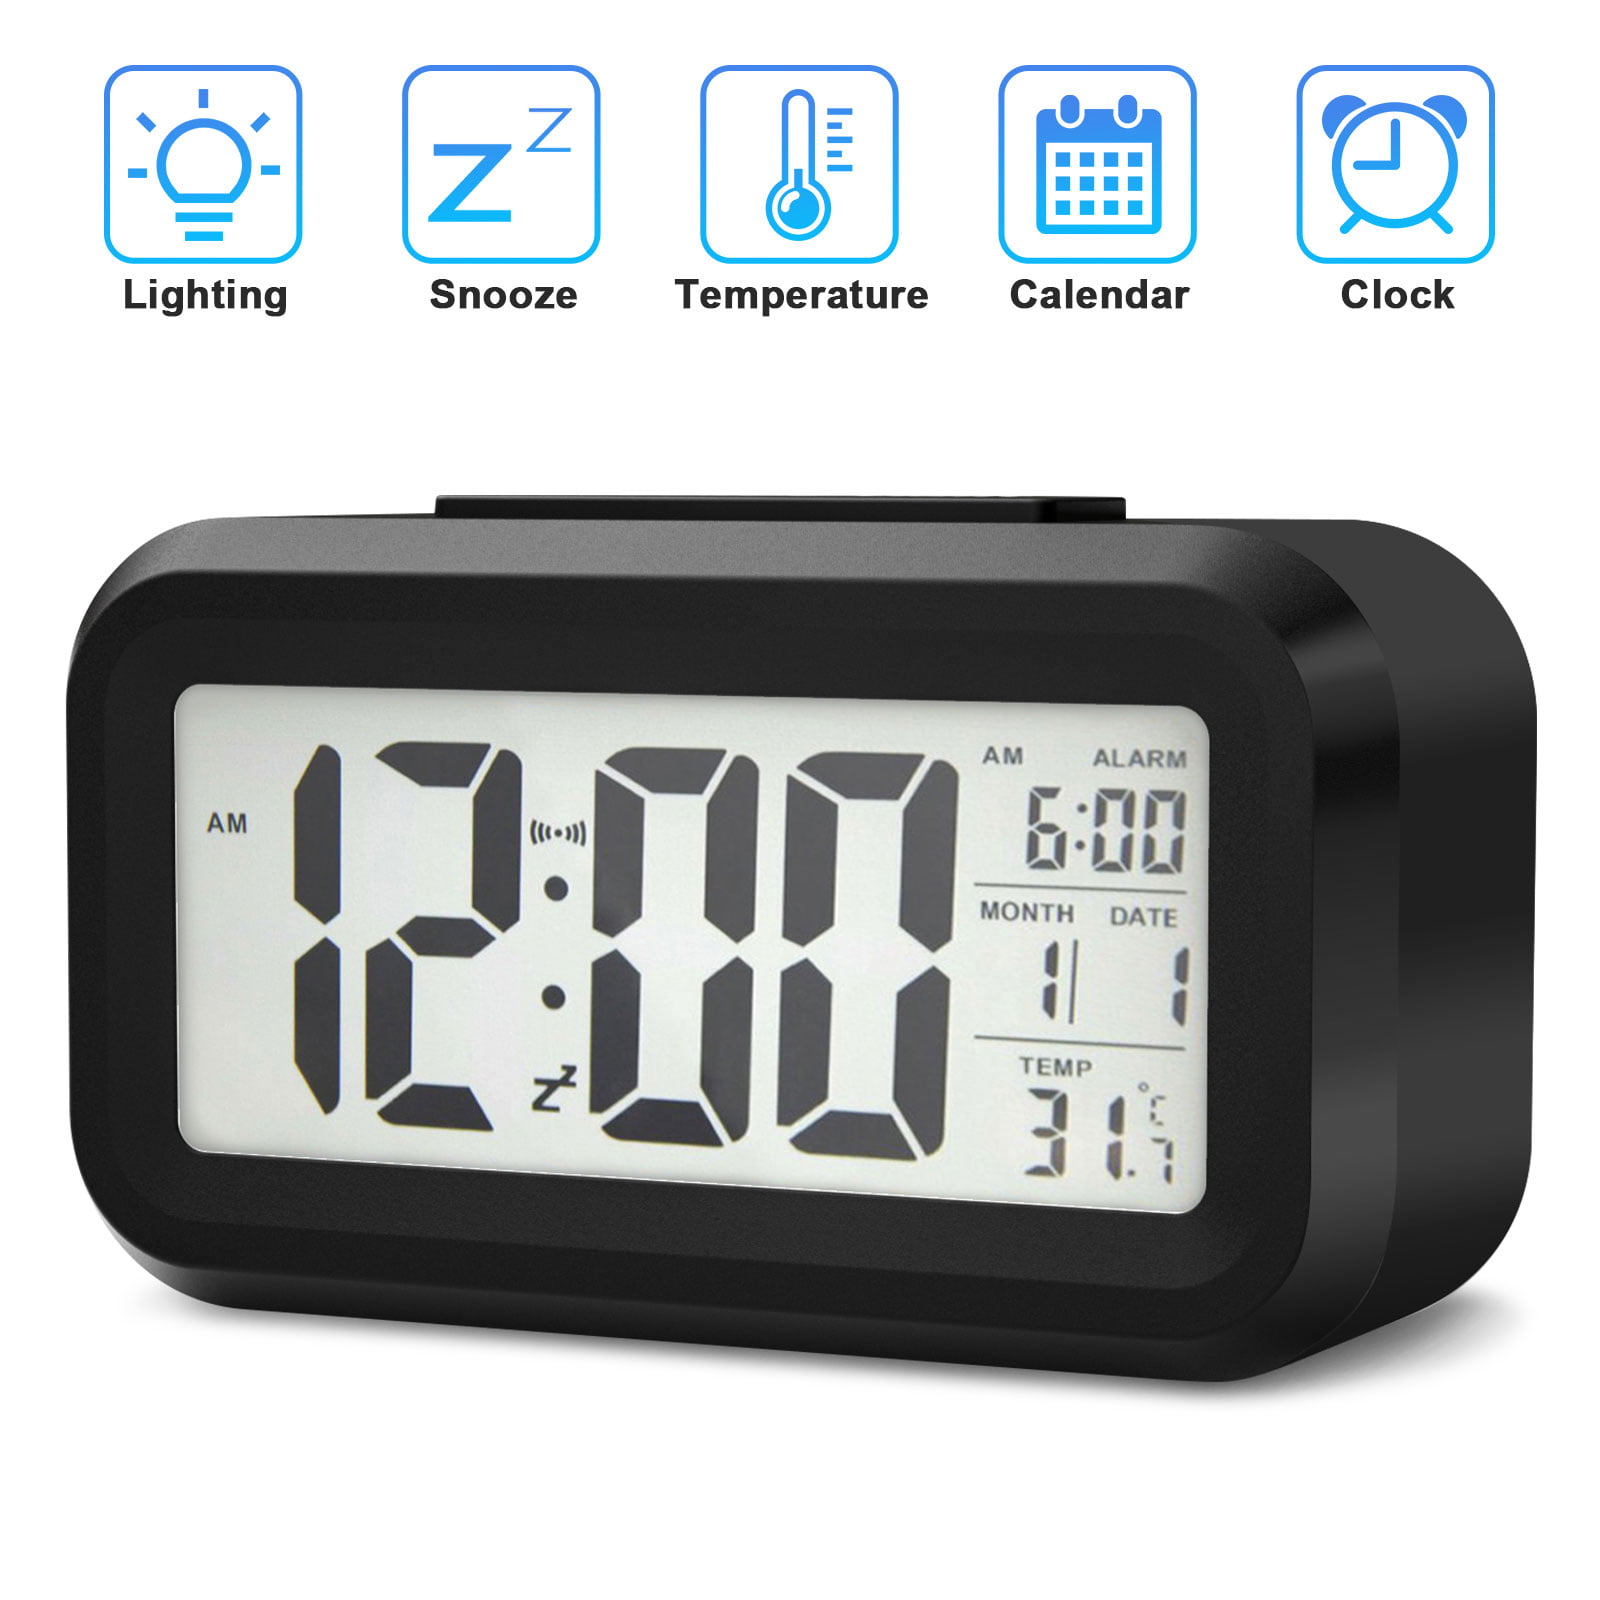 JNS Large Screen Digital LCD Alarm Clock with Snooze Function Temperature Display Date Week Timer 